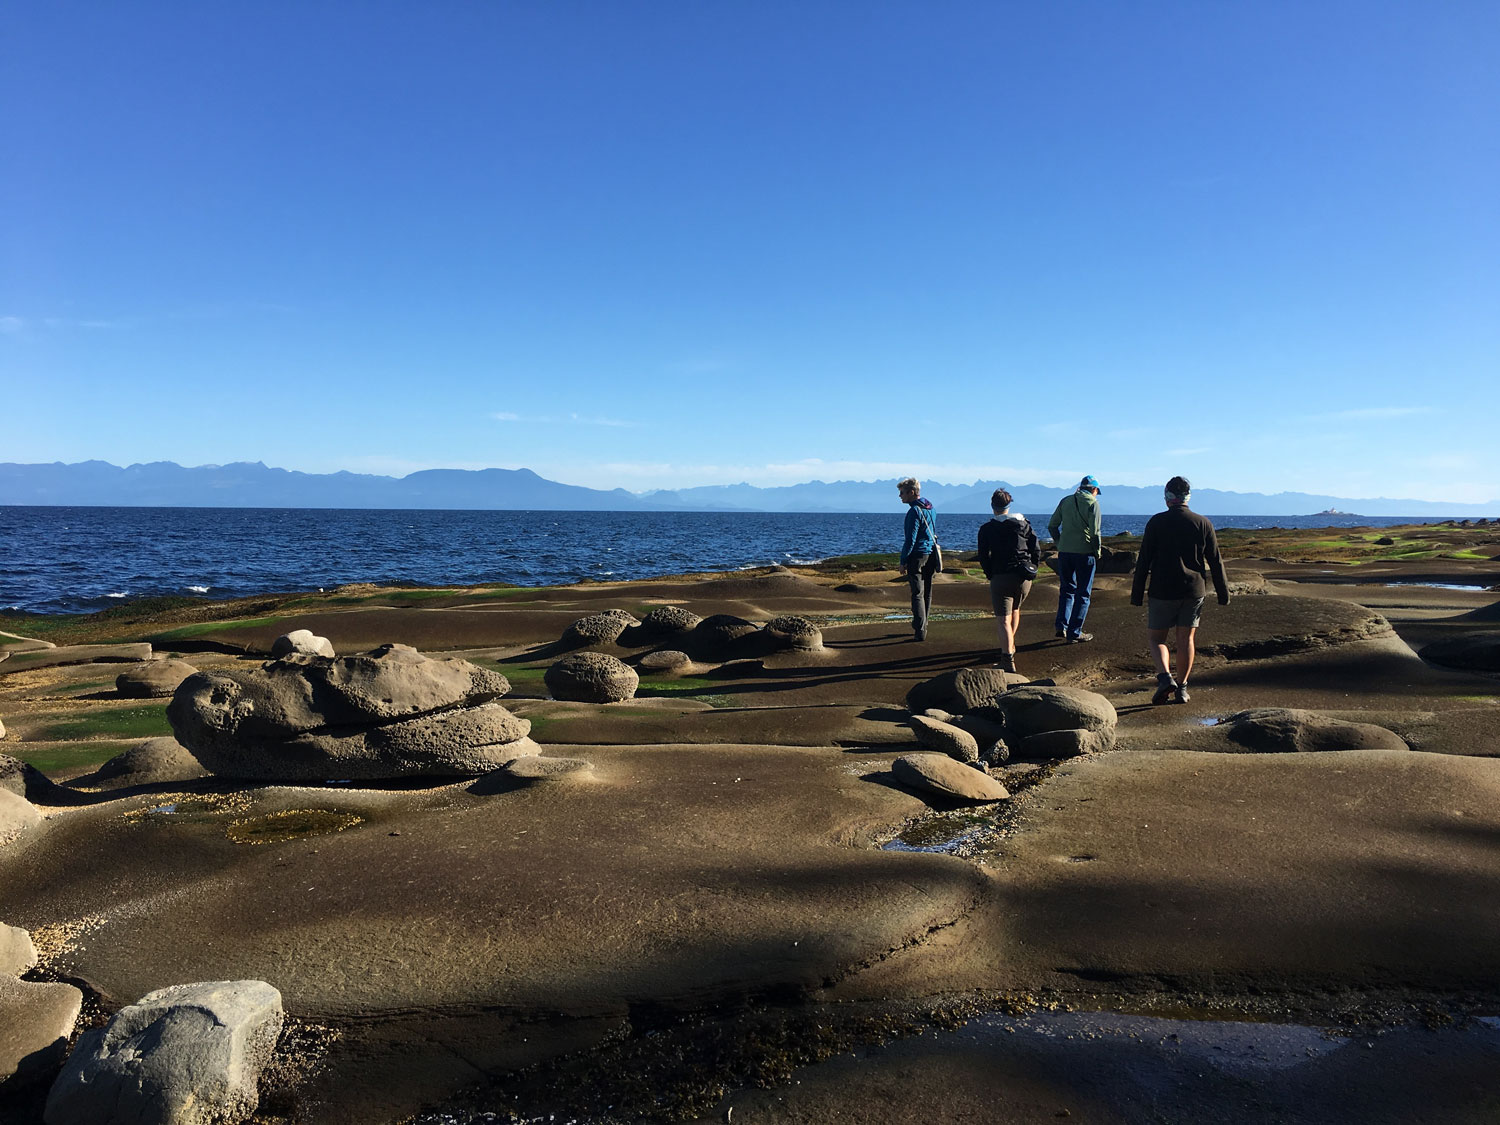 Four people walking along sandstone shelving at the ocean's edge.